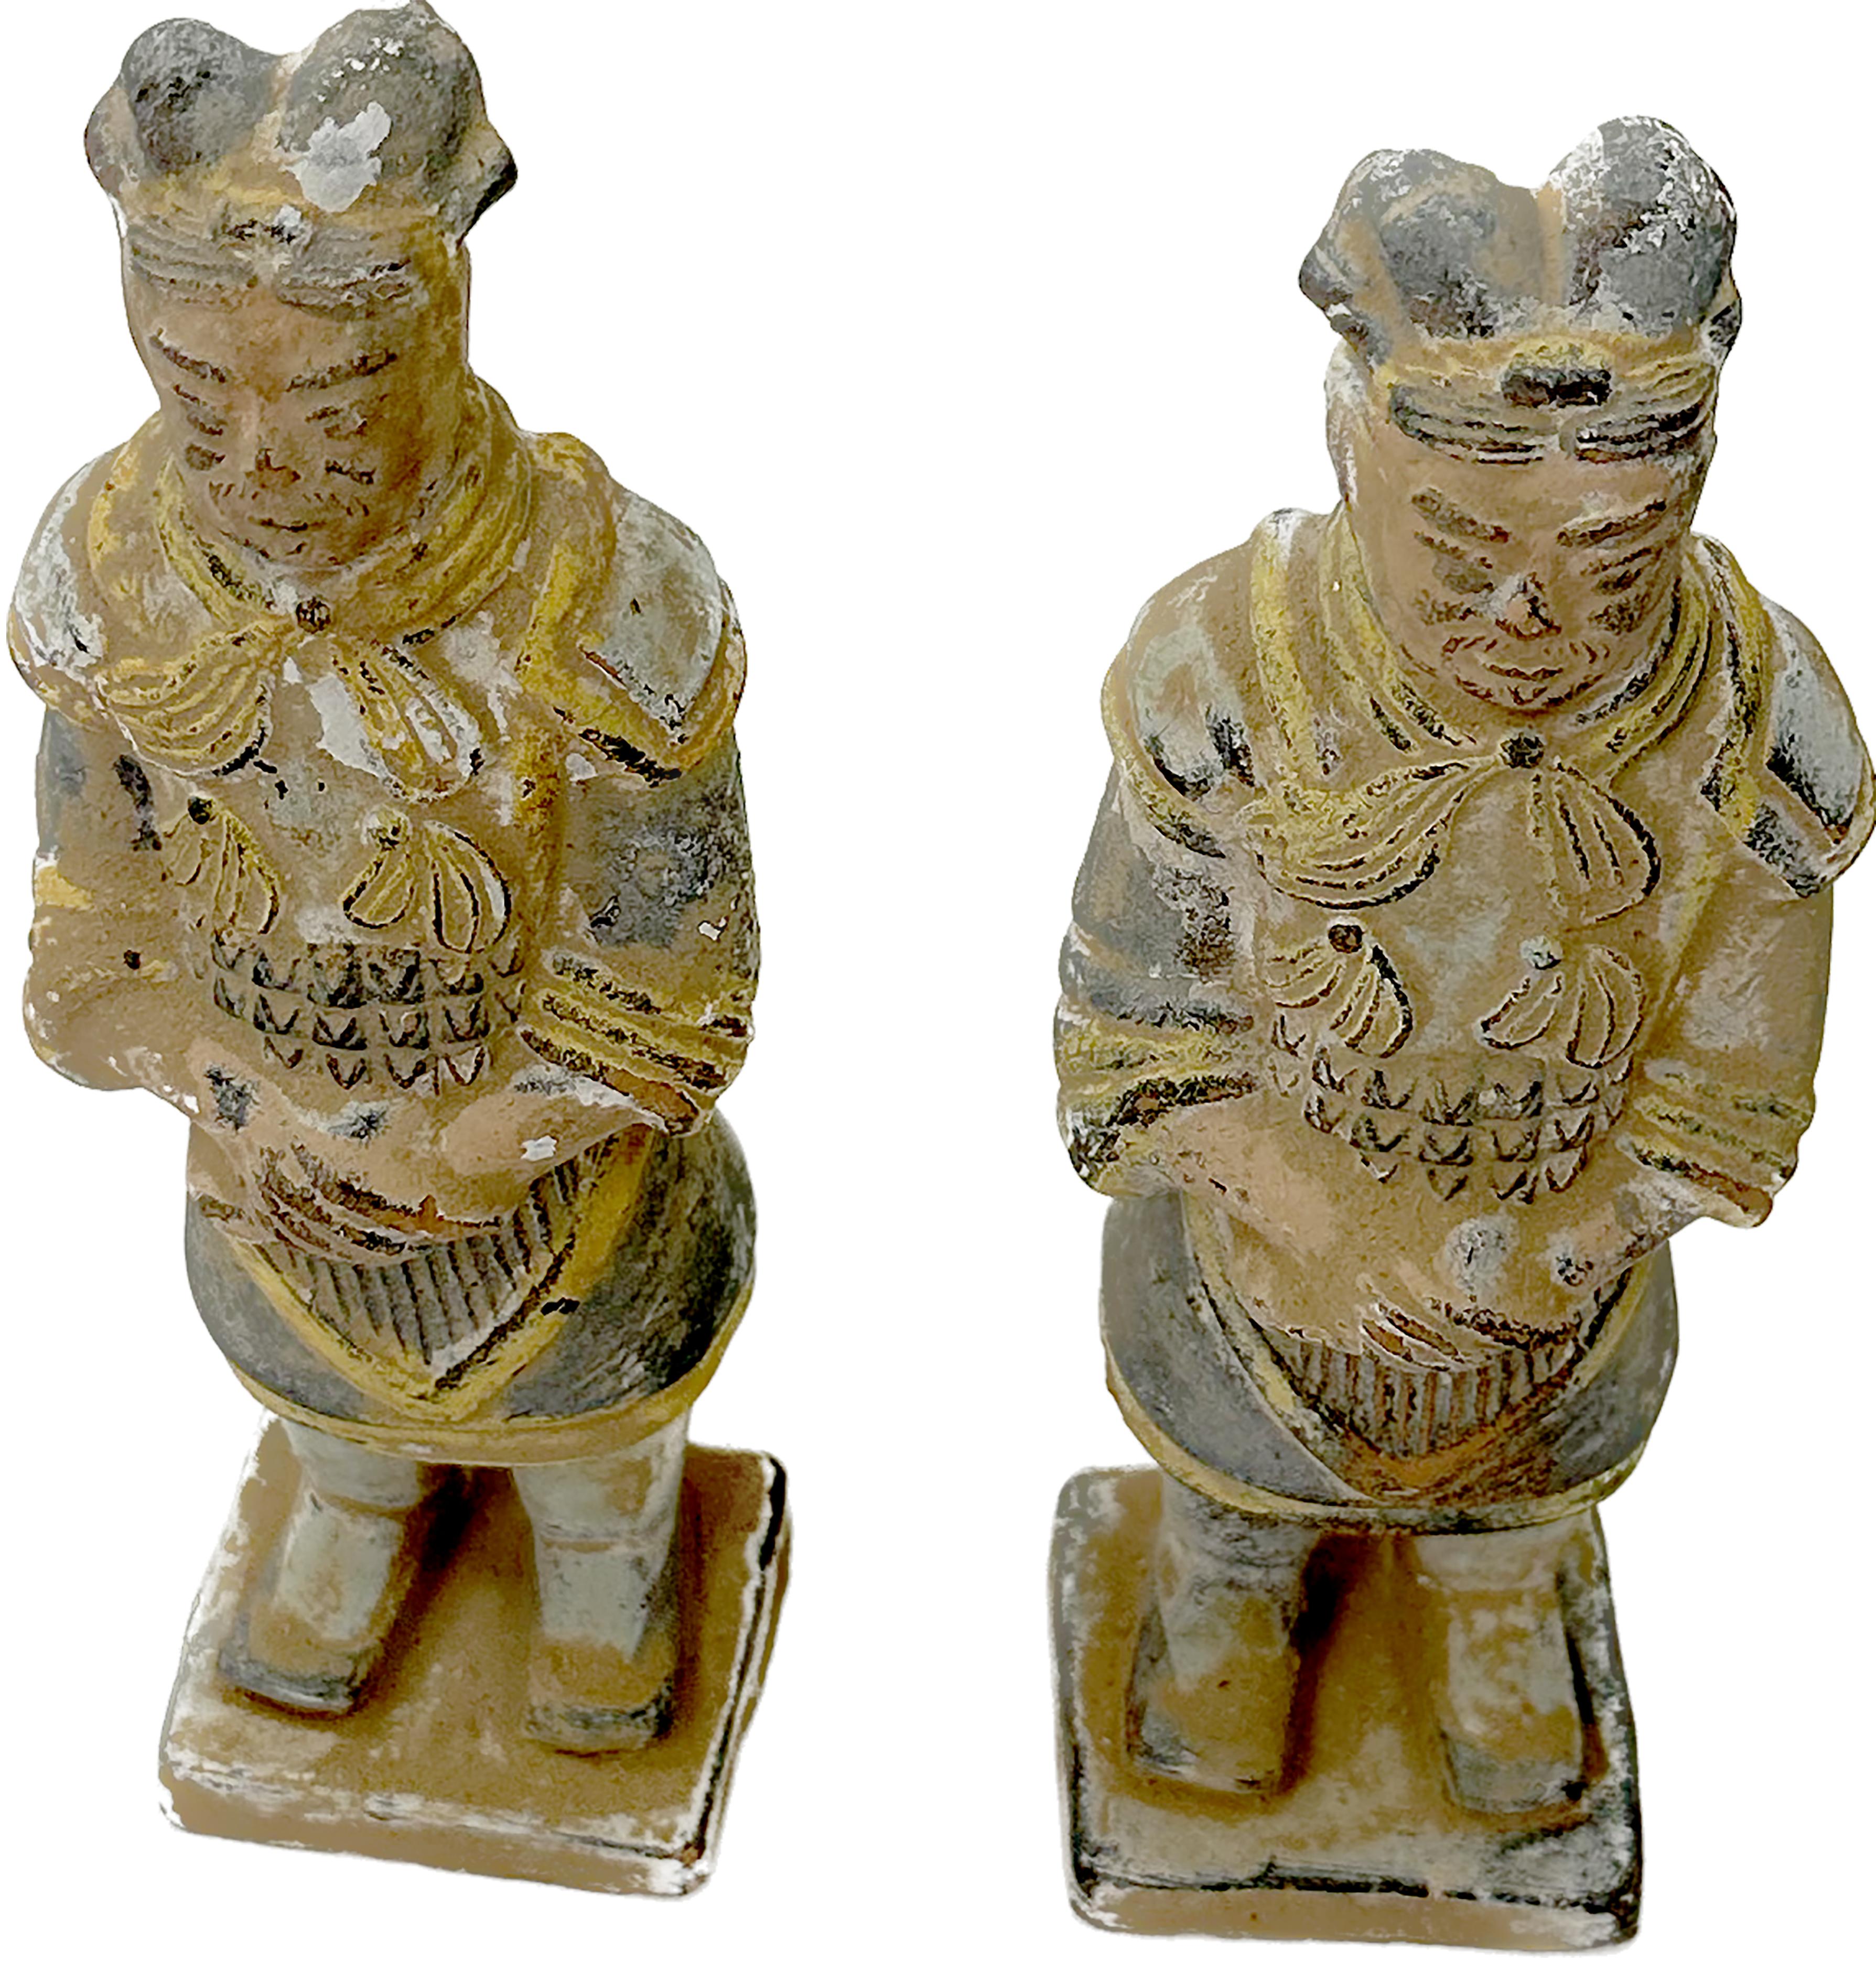 A pair of miniature Chinese terracotta burial soldier figurines 1